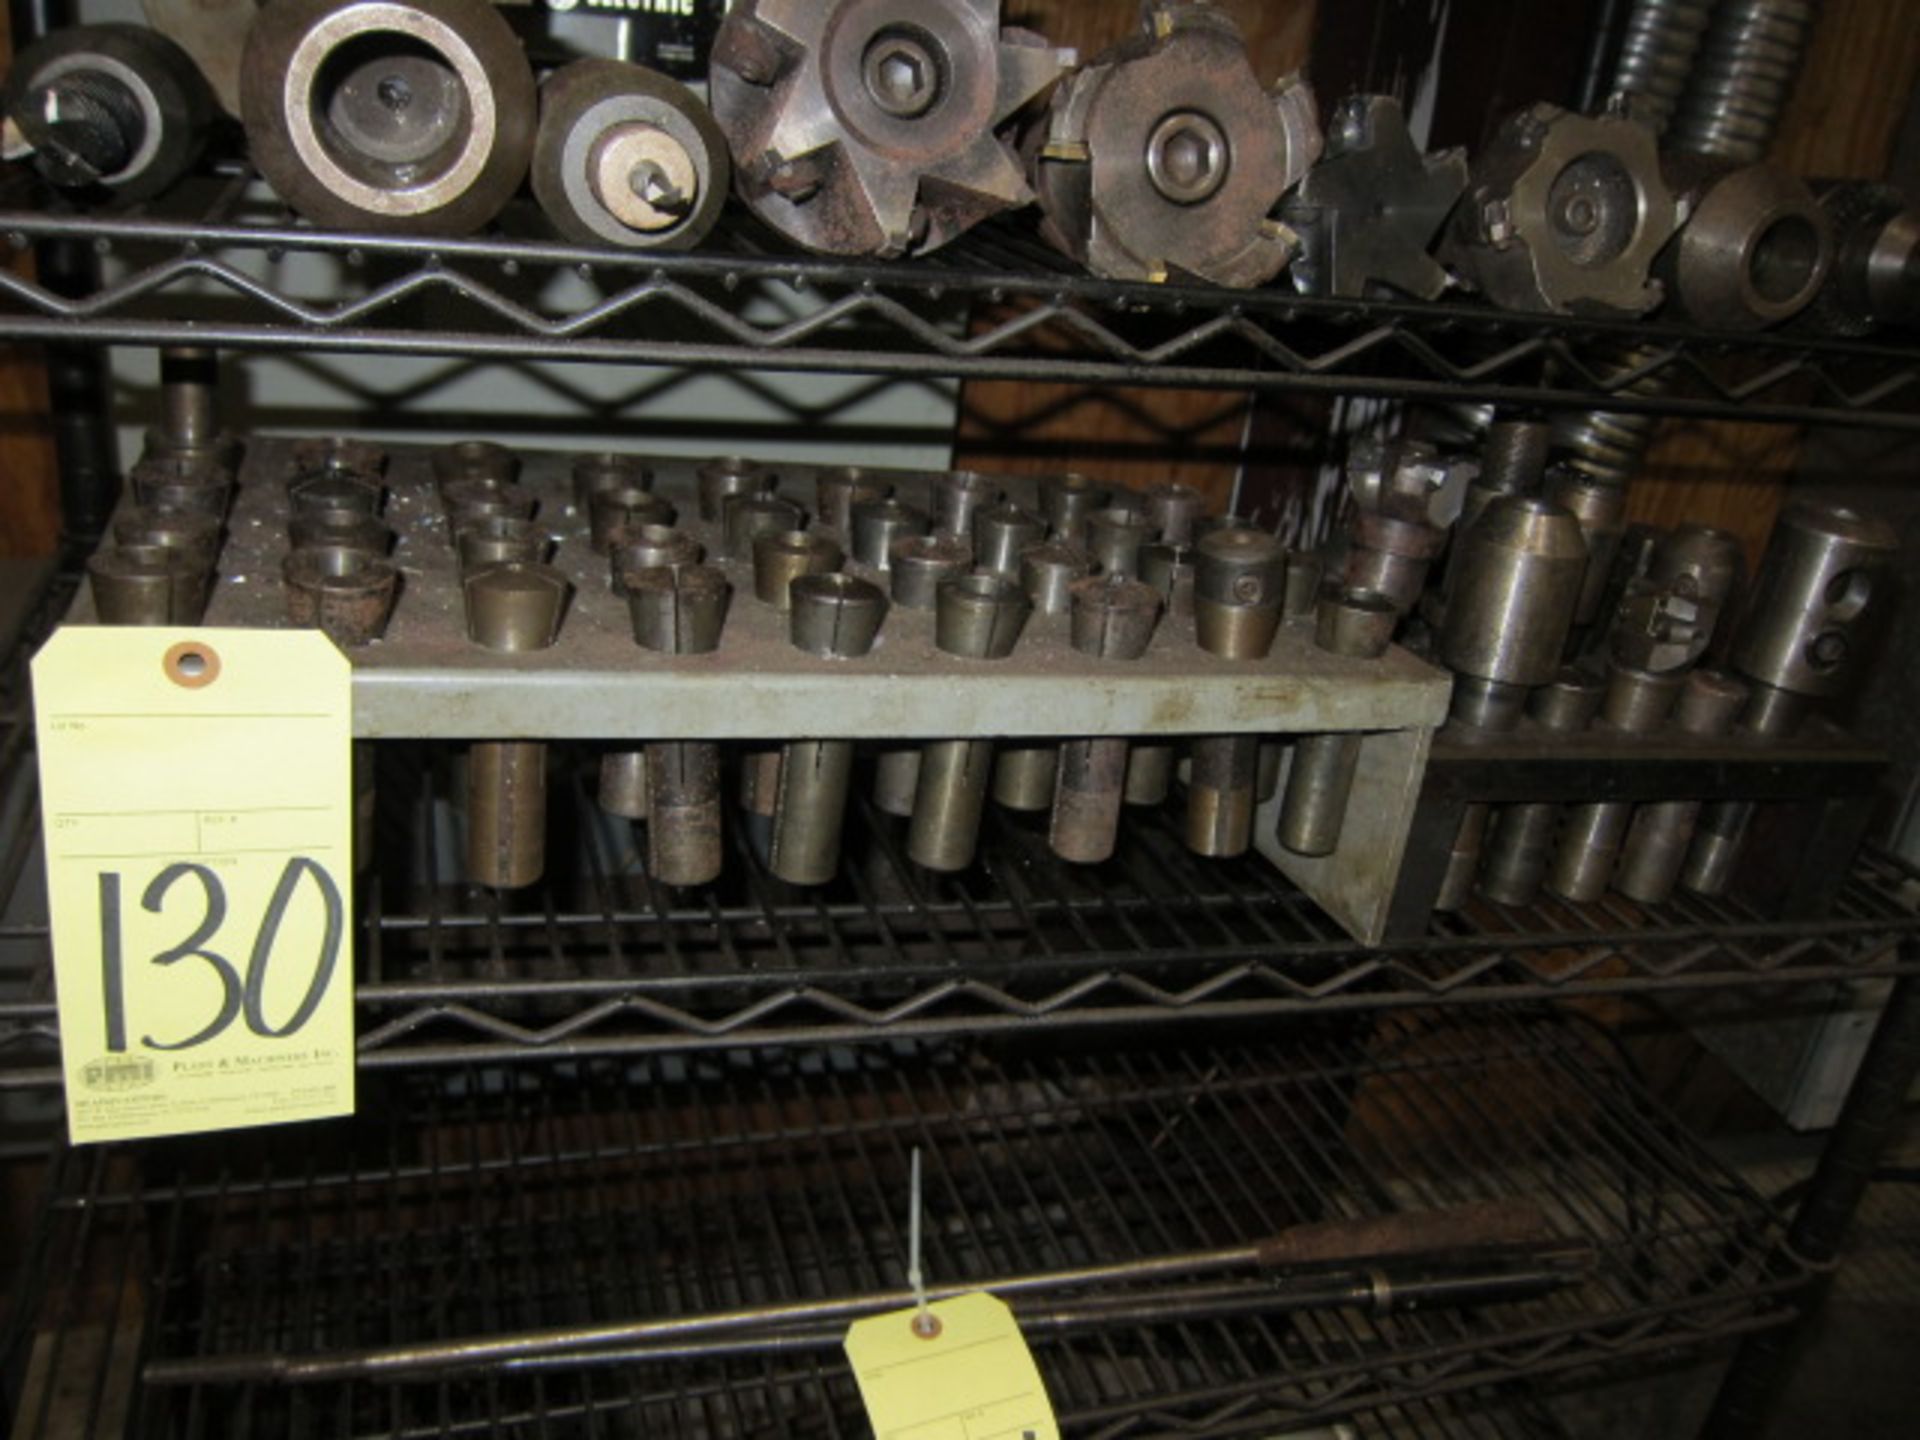 LOT CONSISTING OF: R-8 collets, toolholders & (2) racks